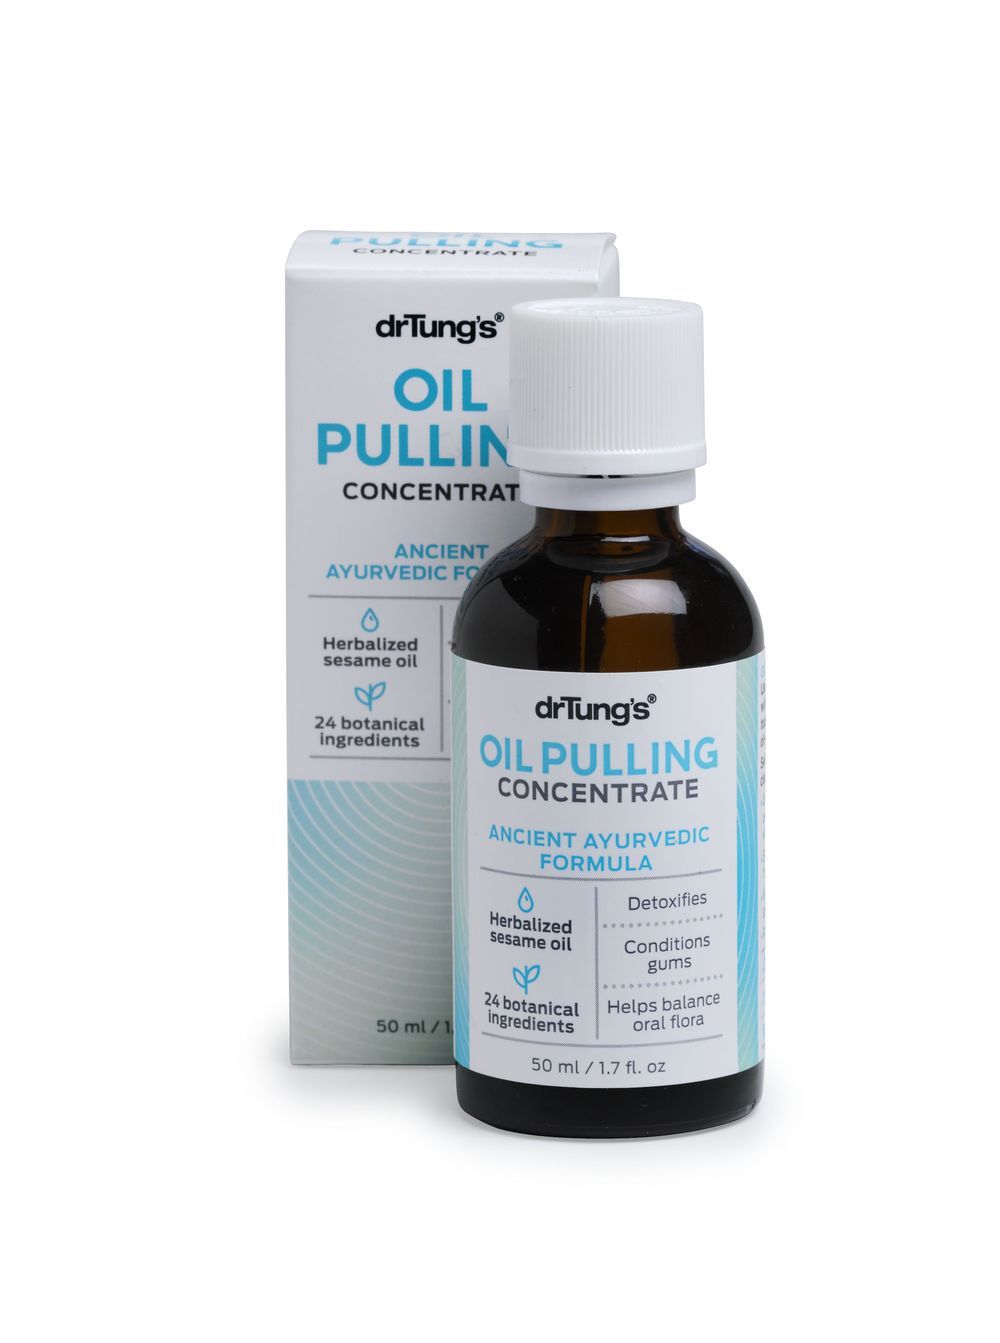 Dr Tung's Oil Pulling Concentrate